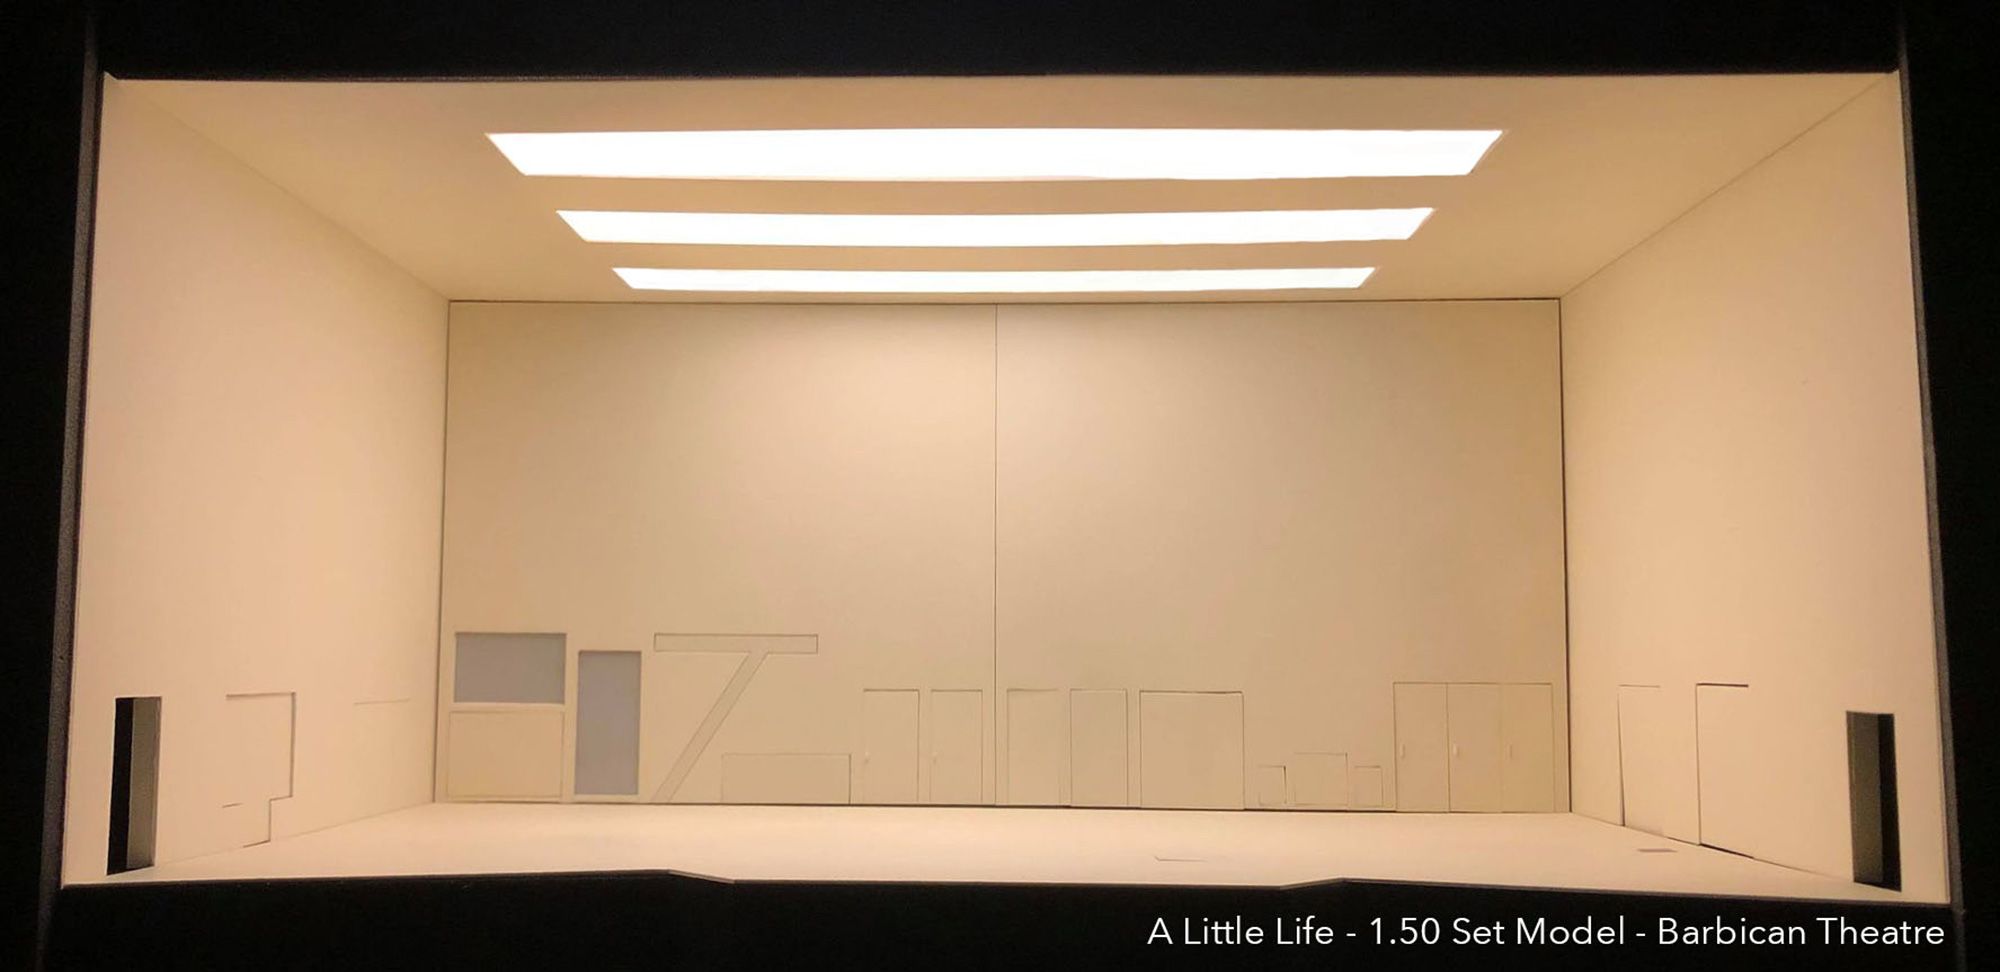 A set model of a cream coloured room lit from above